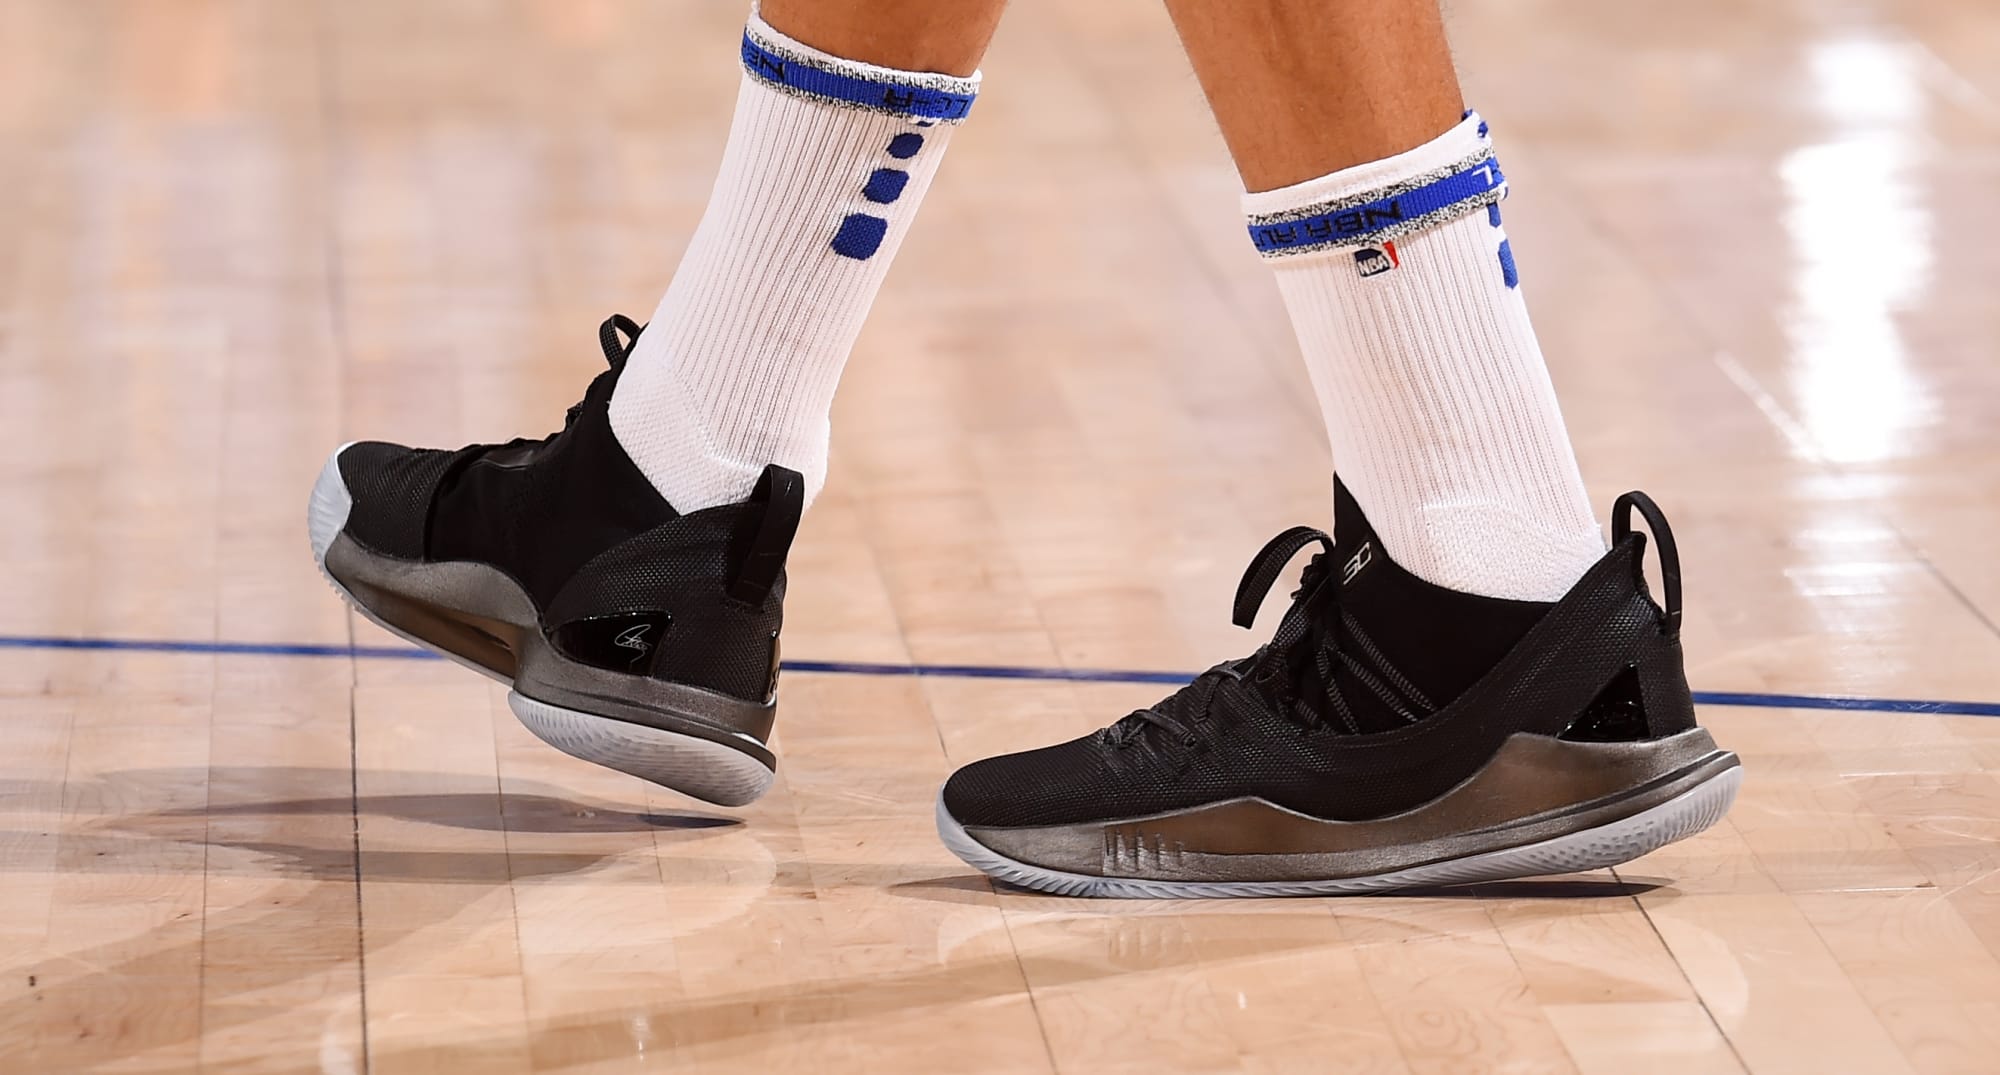 Steph Curry to Wear Low-Top Shoes Tonight vs Hawks